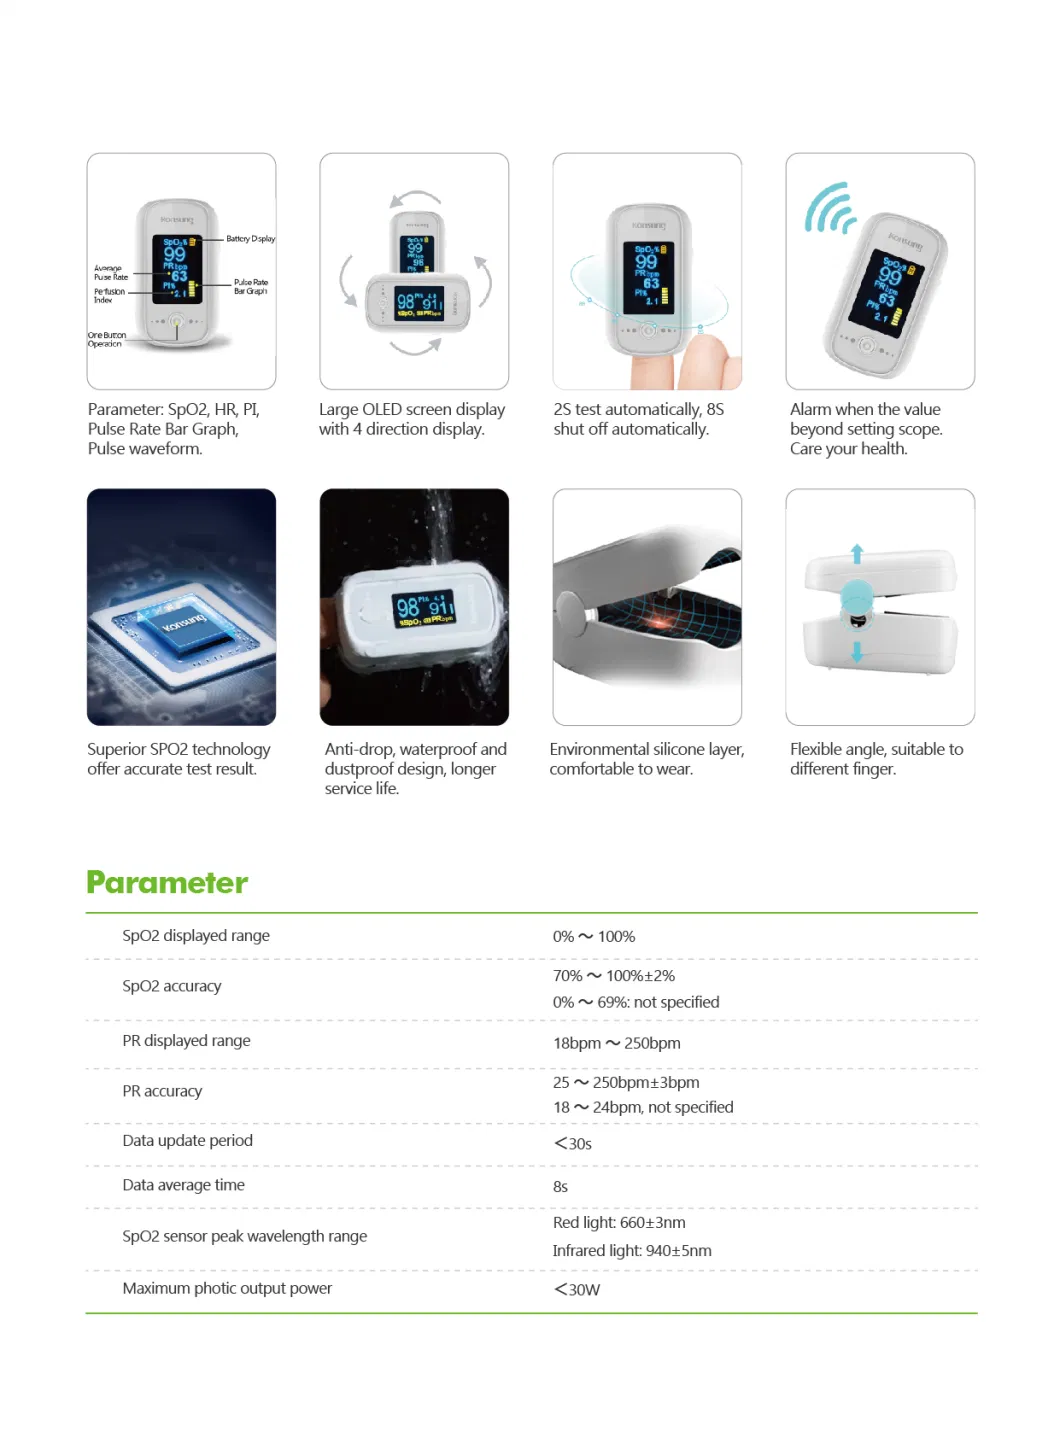 F02lp Compact Design Fingertip Pulse Oximeter with Bluetooth Function